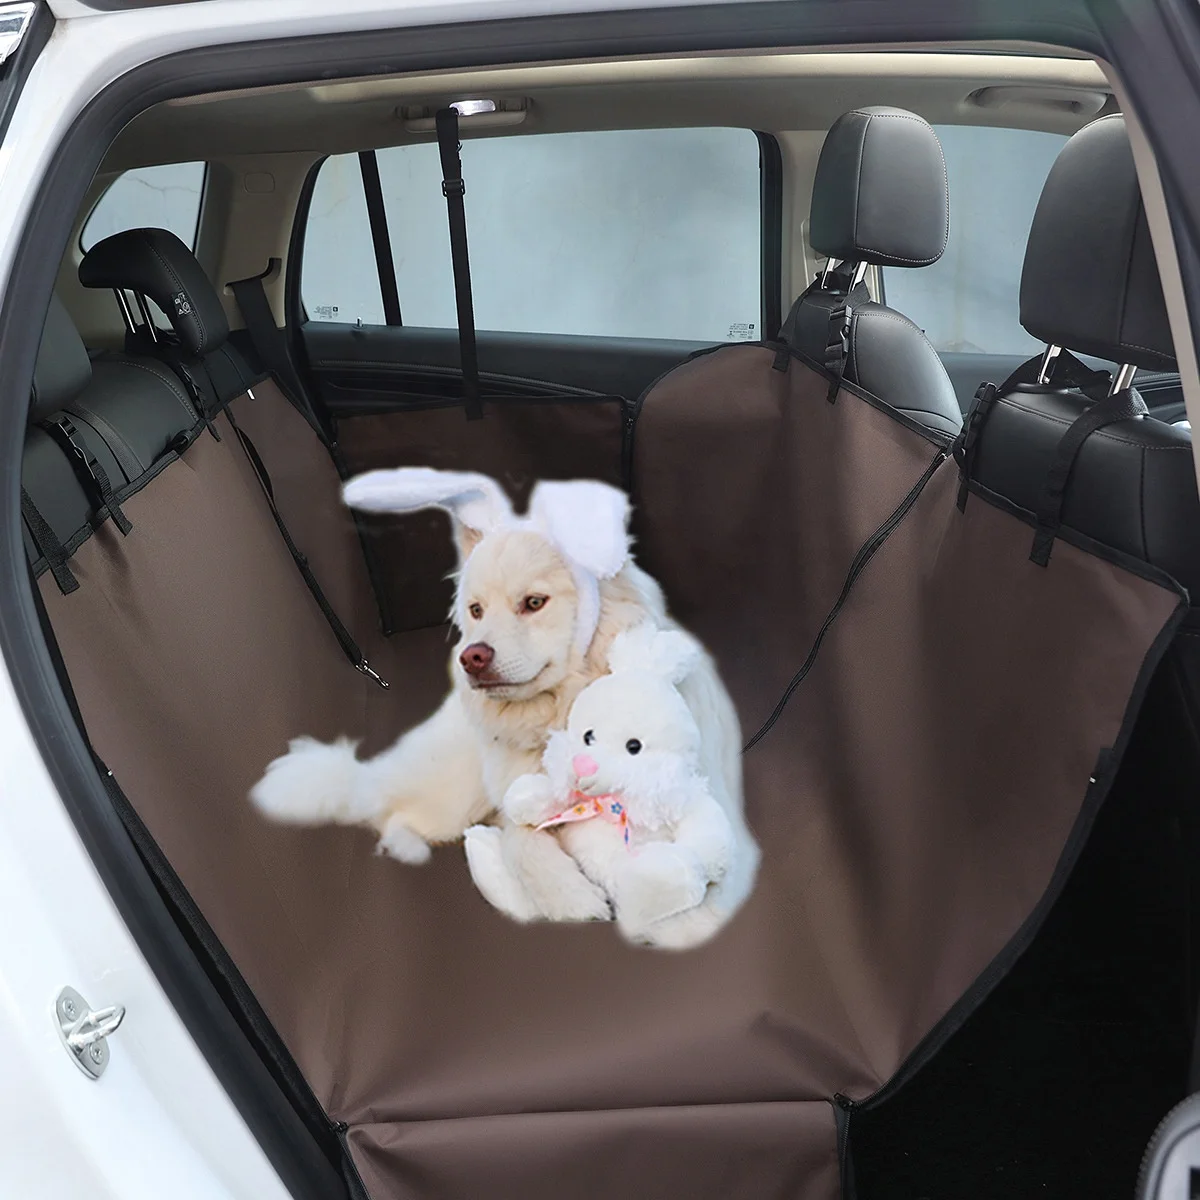 

Dog Pet Waterproof Hammock Nonslip Durable Soft Back Car Seat Cover For Cars For Dogs, Picture